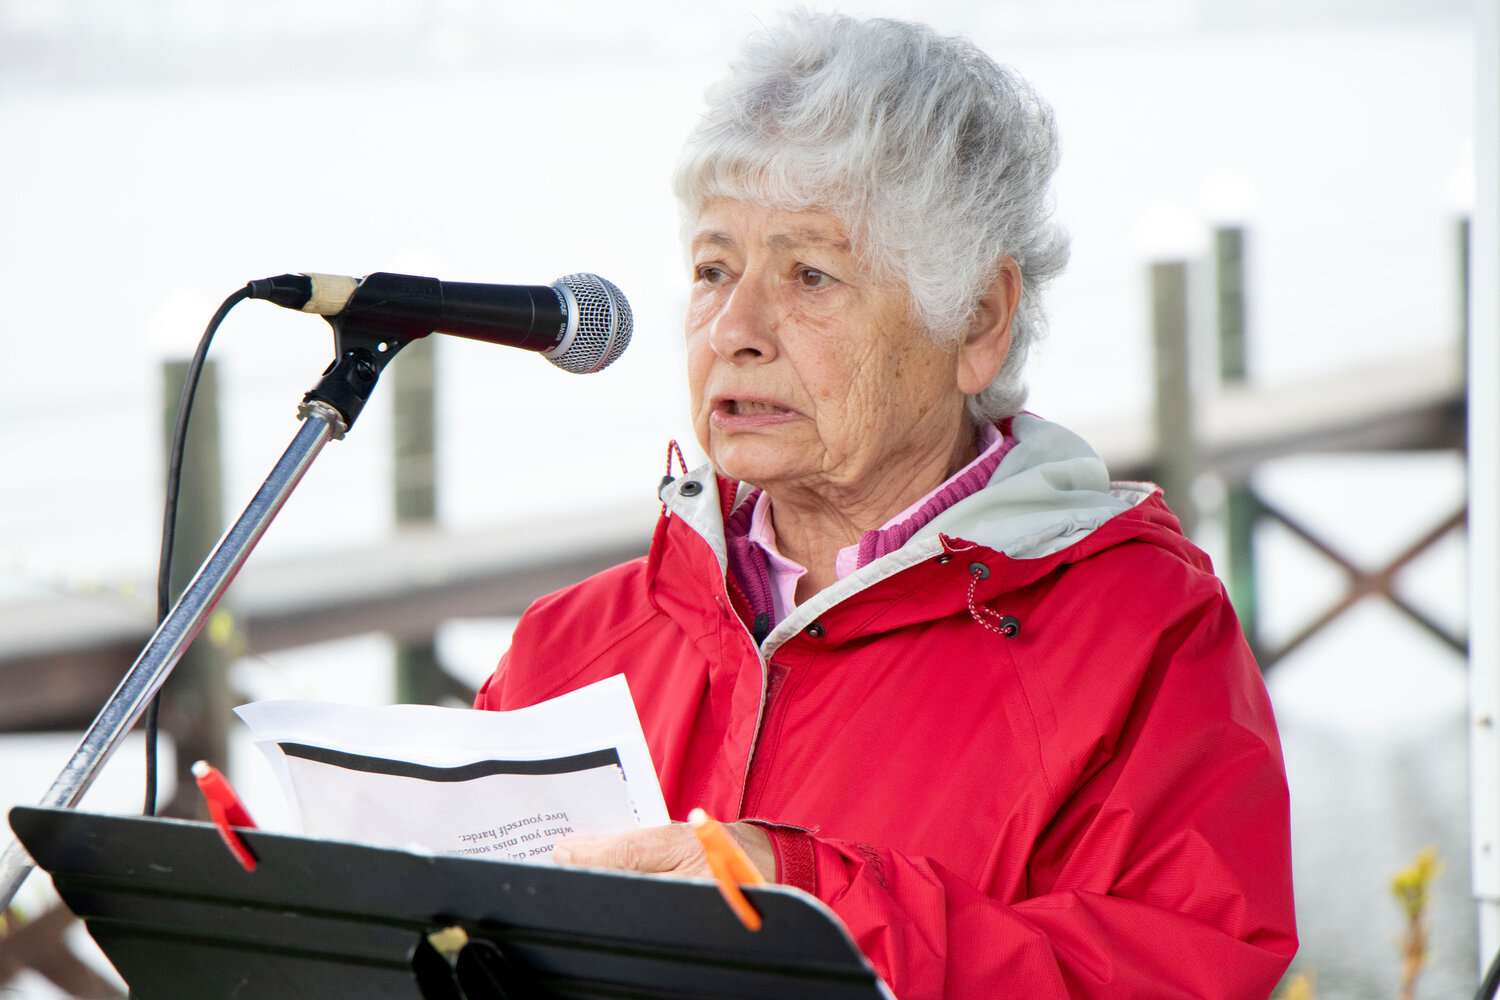 Judy Carvalho reads a poem, “On Those Days” by Donna Ashworth, during the vigil.